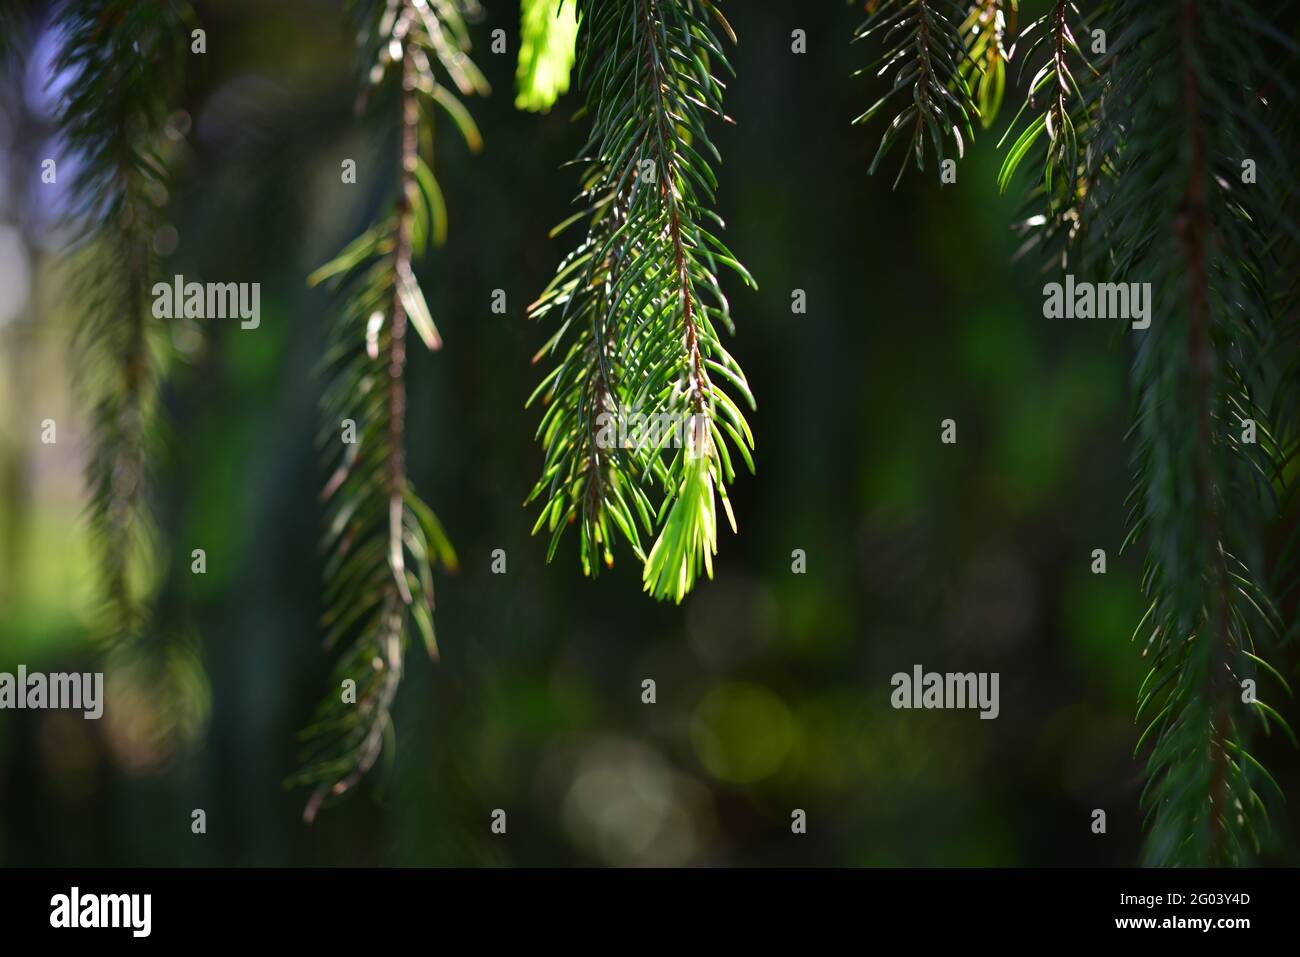 A branch of European spruce or Picea abies with young shoots. Cultivar Virgata or Snake branch spruce. Stock Photo